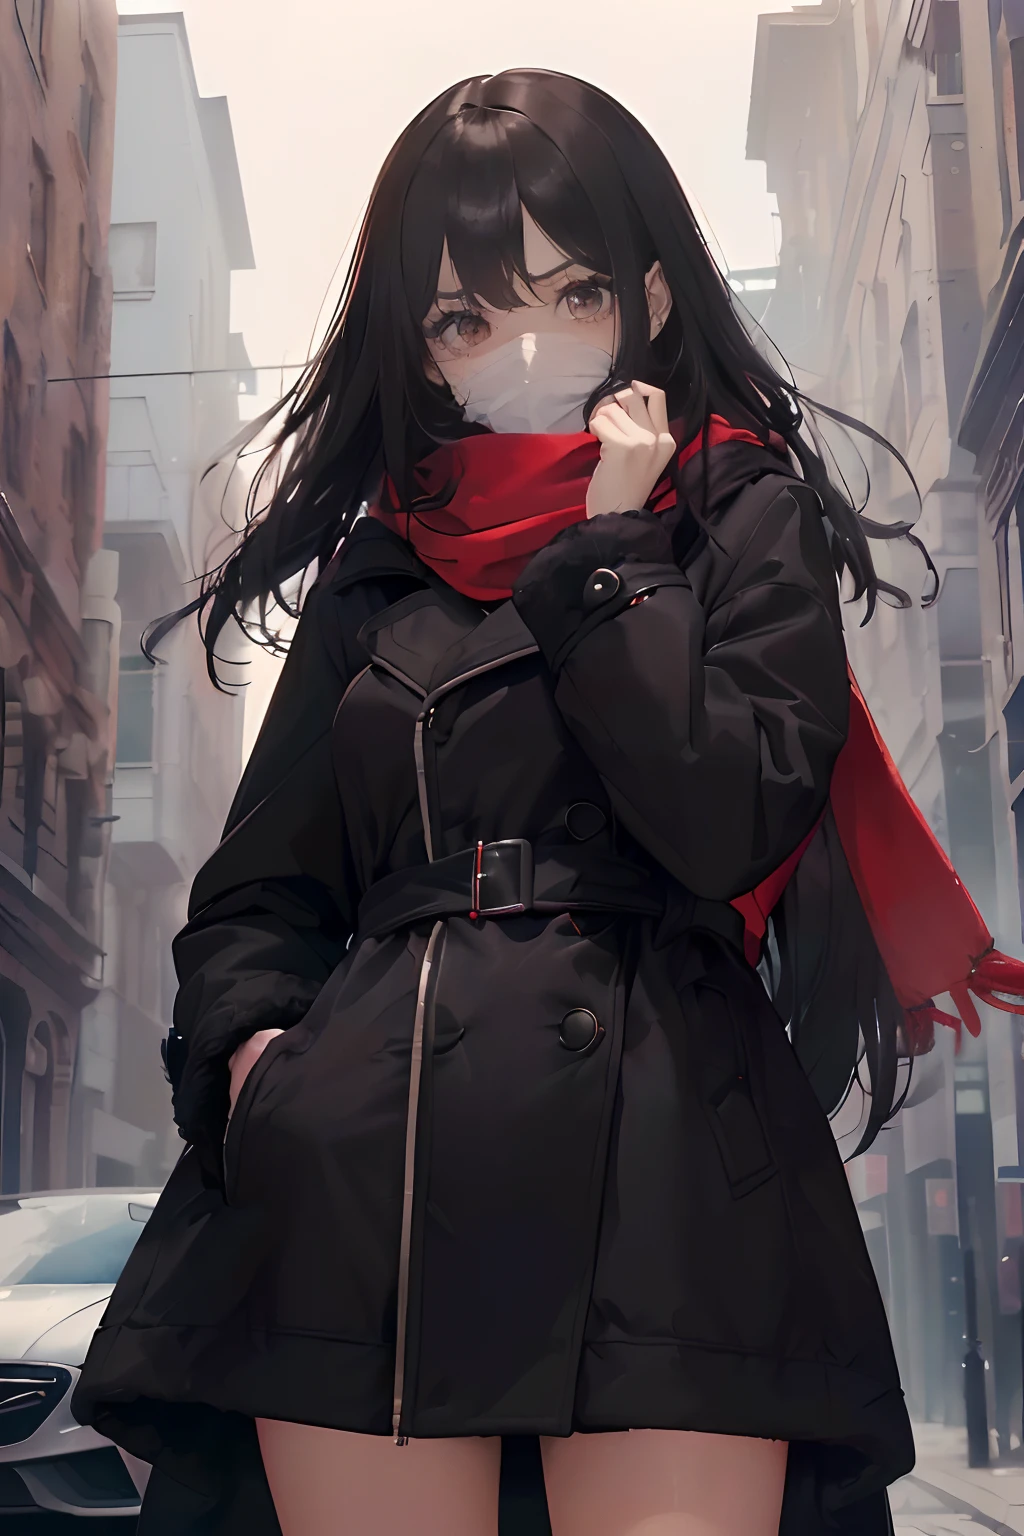 (((A very worried looking woman is standing while looking down at viewer covering her mouth, quivering. She is wearing a black puff coat with a red scarf and has long black hair and brilliant brown eyes.))) ((hips to top of head in view)), (((detailed eyes)))